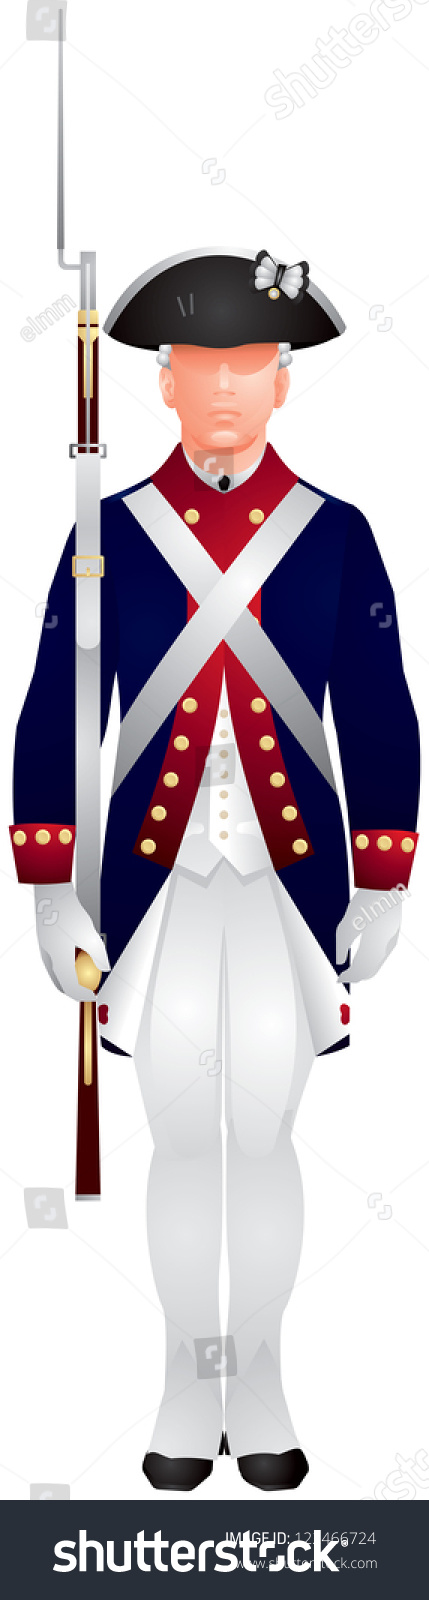 clipart of revolutionary war soldiers - photo #38